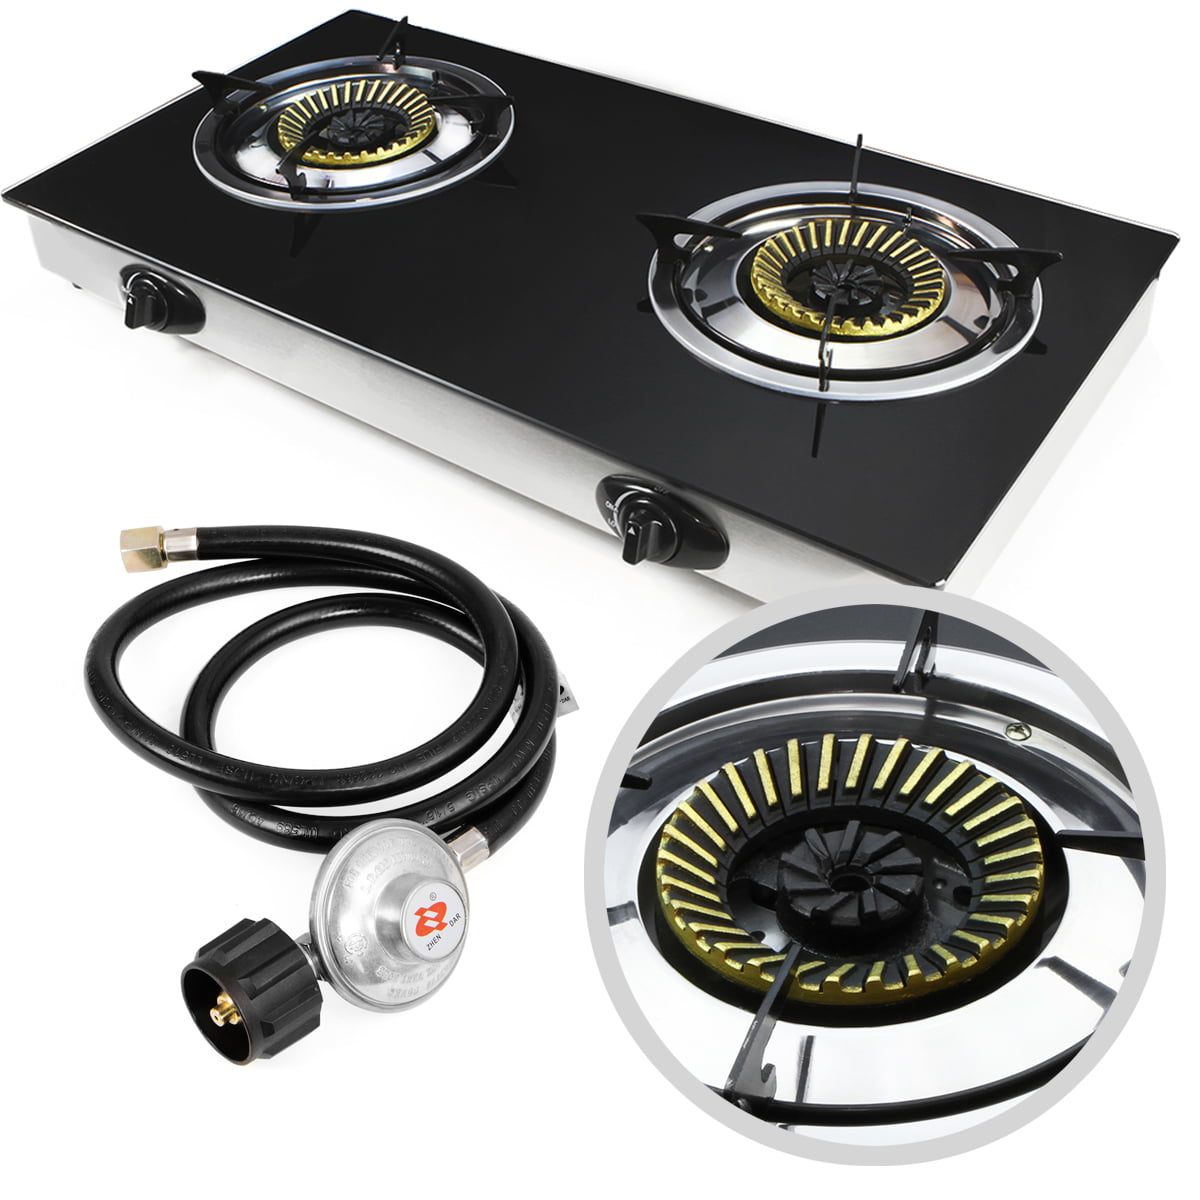 Modern Outdoor Gas Stove Burner with Simple Decor